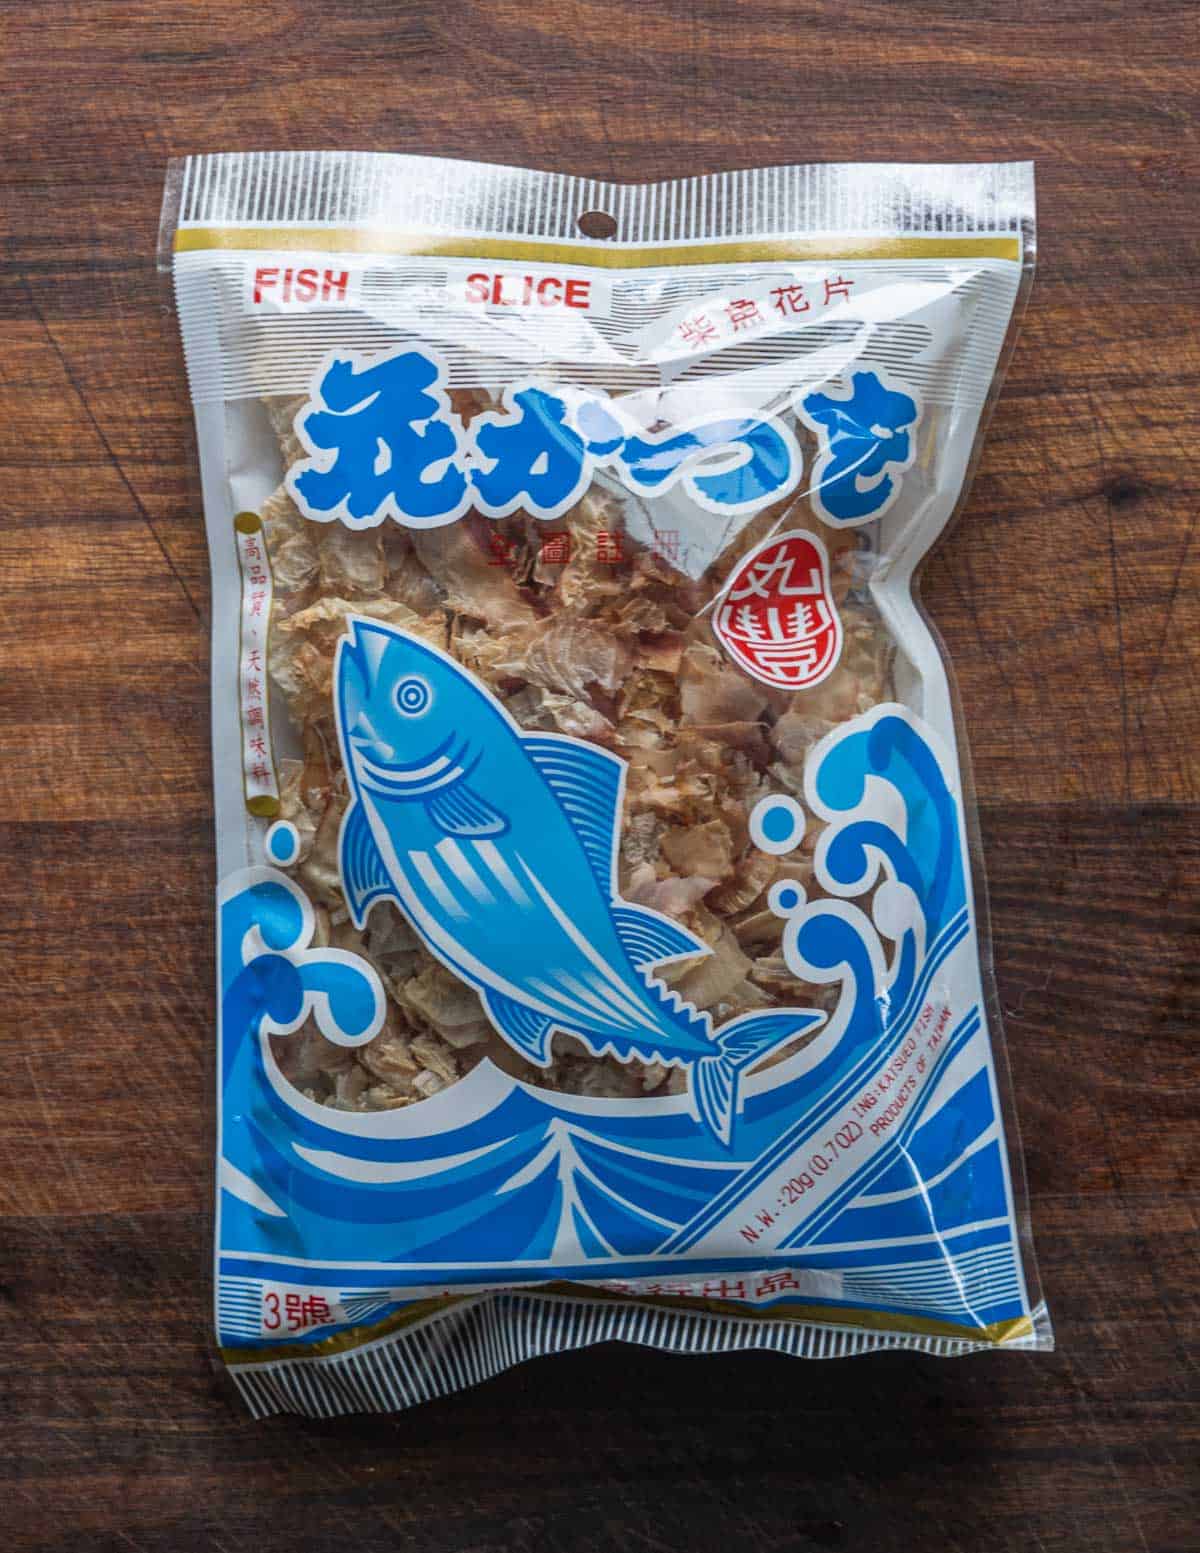 A nag of bonito flakes from an Asian grocer for making dashi. 